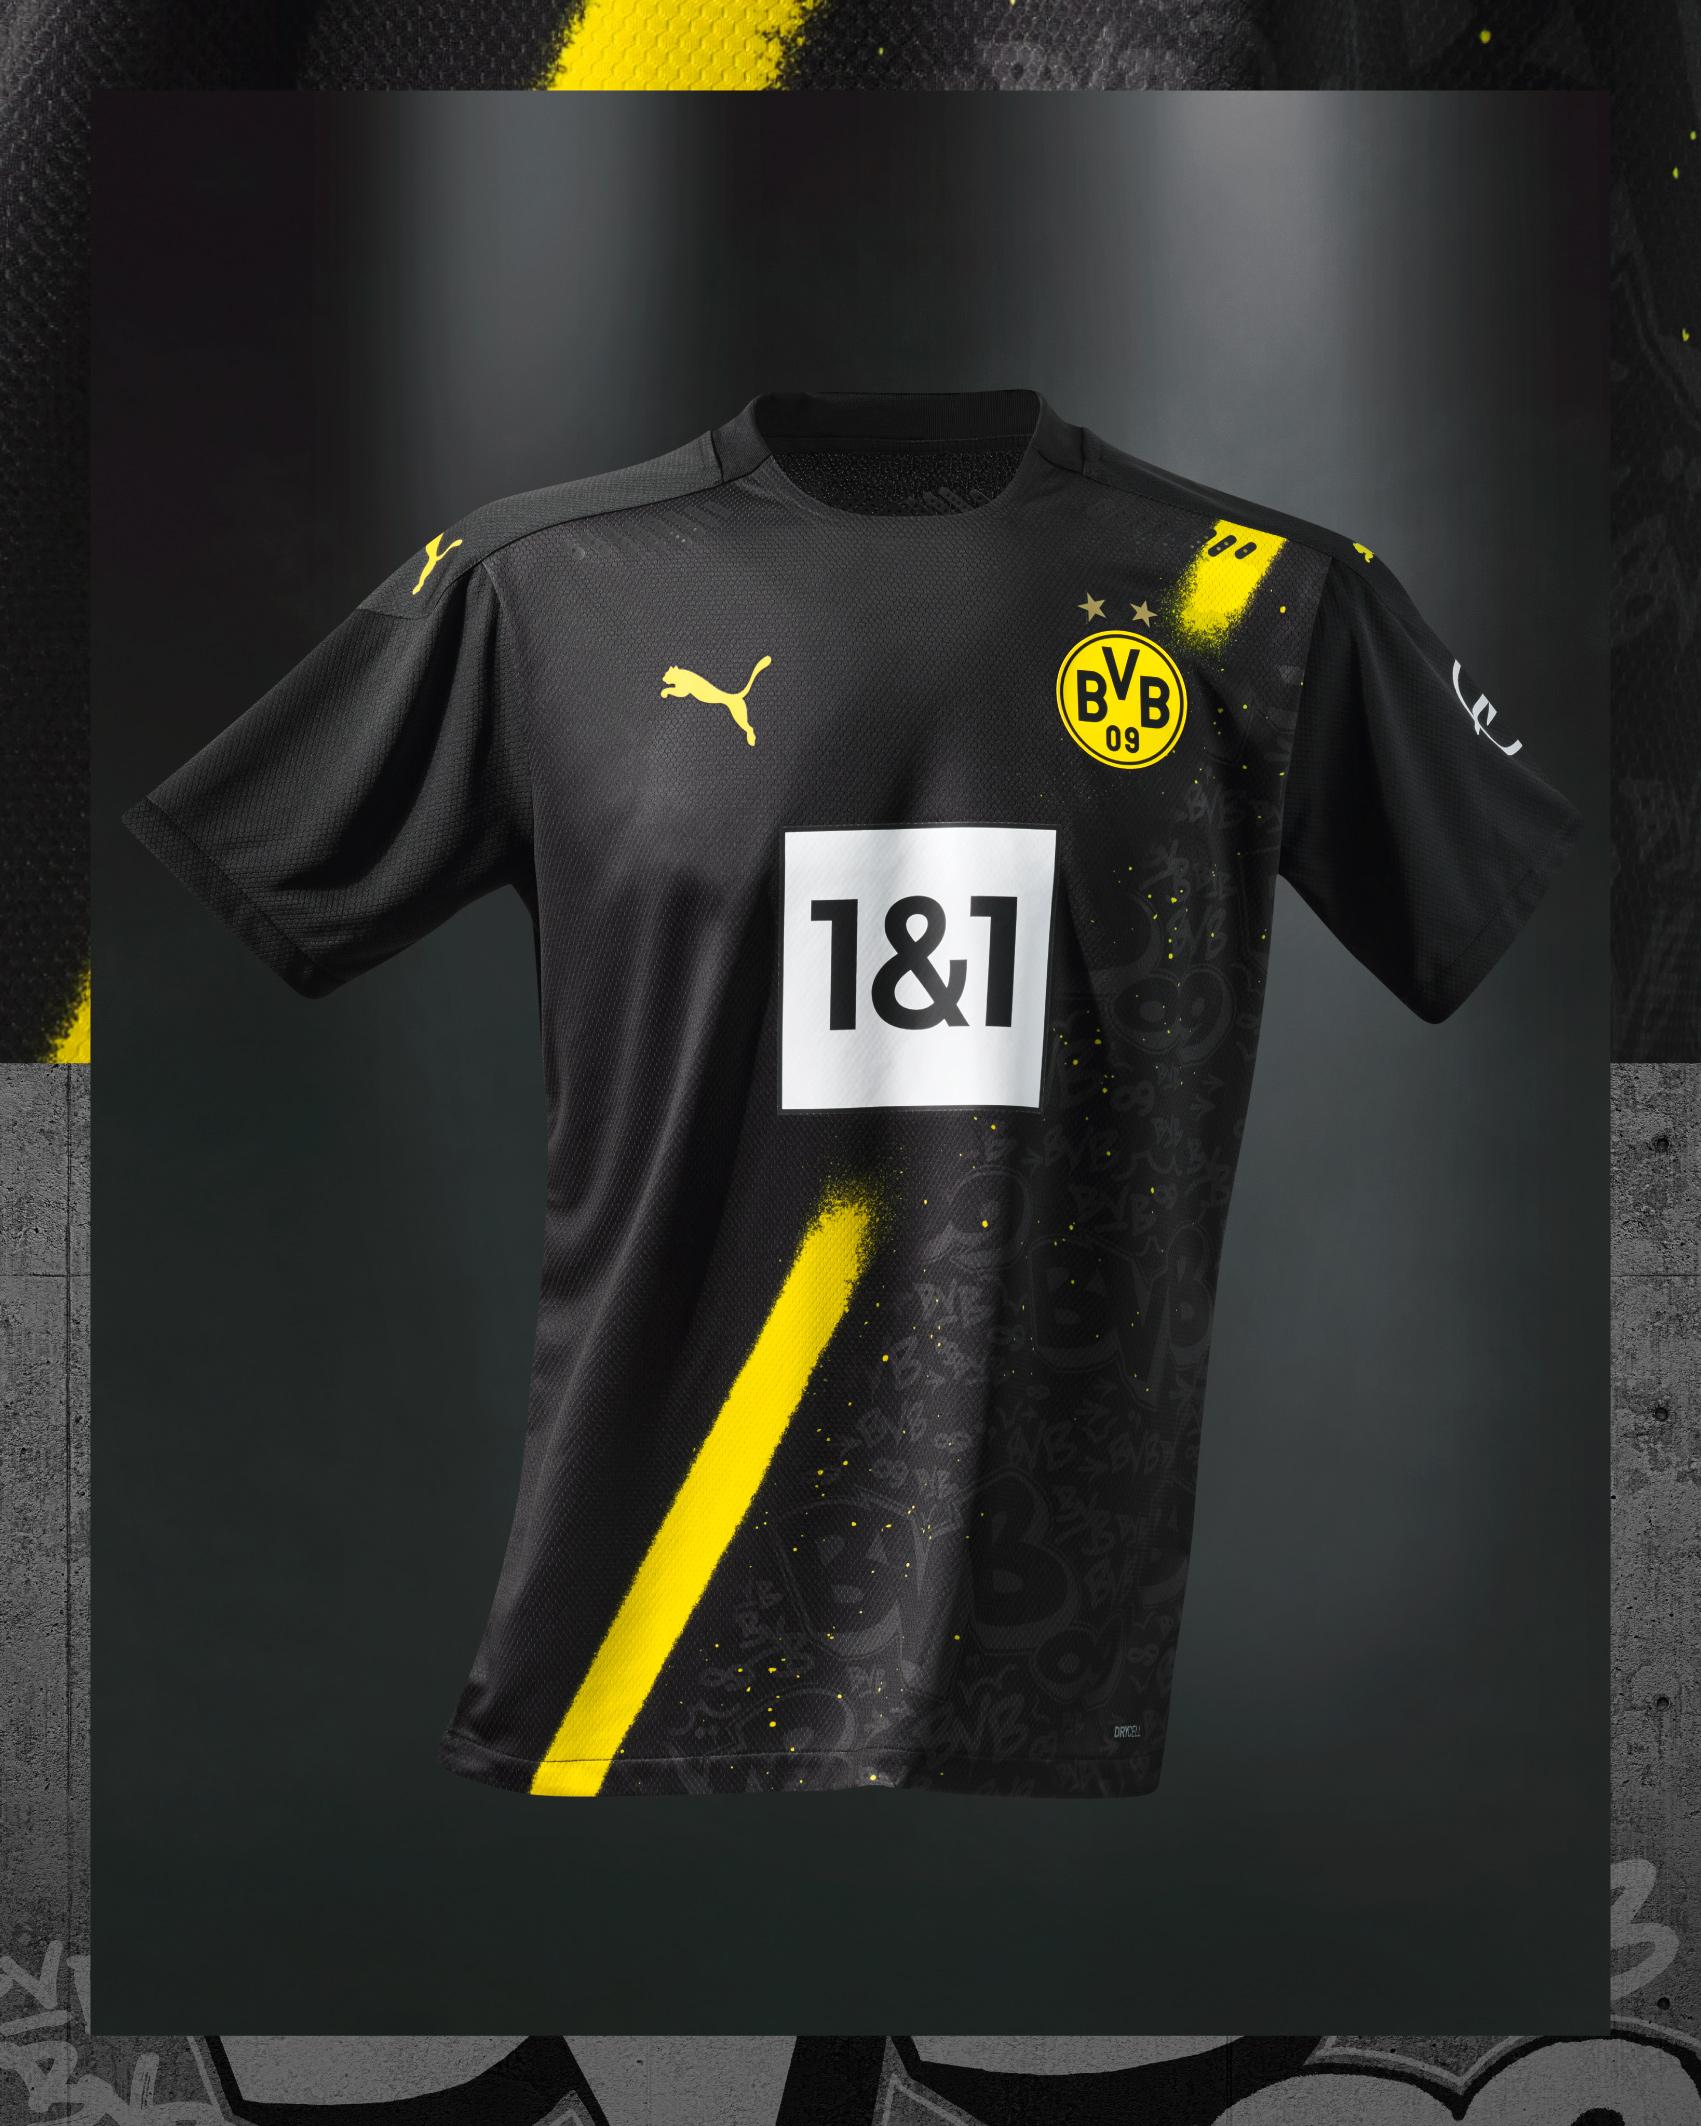 Puma unveils the new BVB Away Kit inspired by the street art of dortmund